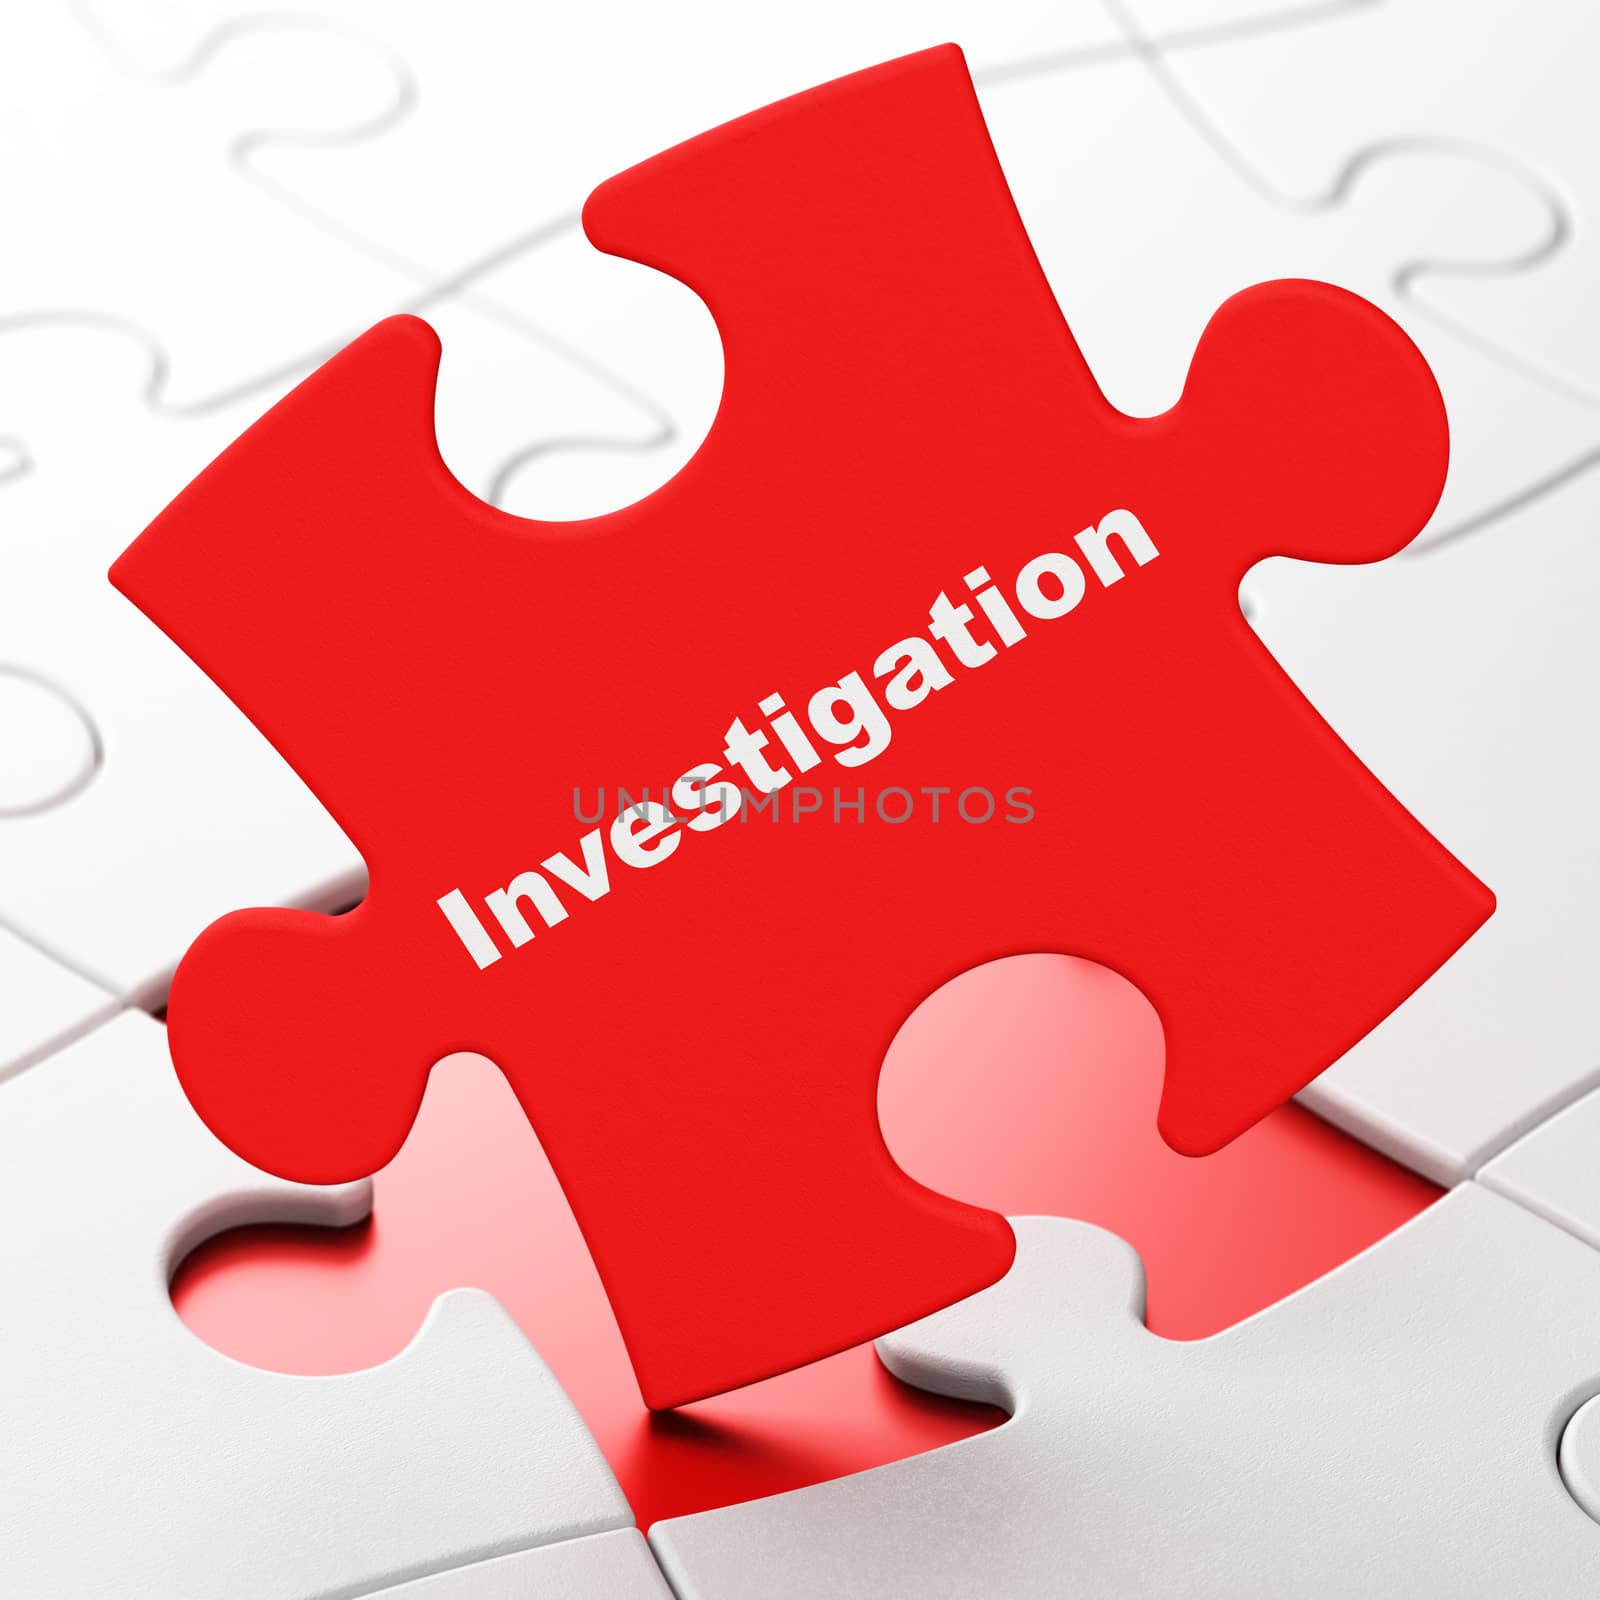 Science concept: Investigation on Red puzzle pieces background, 3D rendering